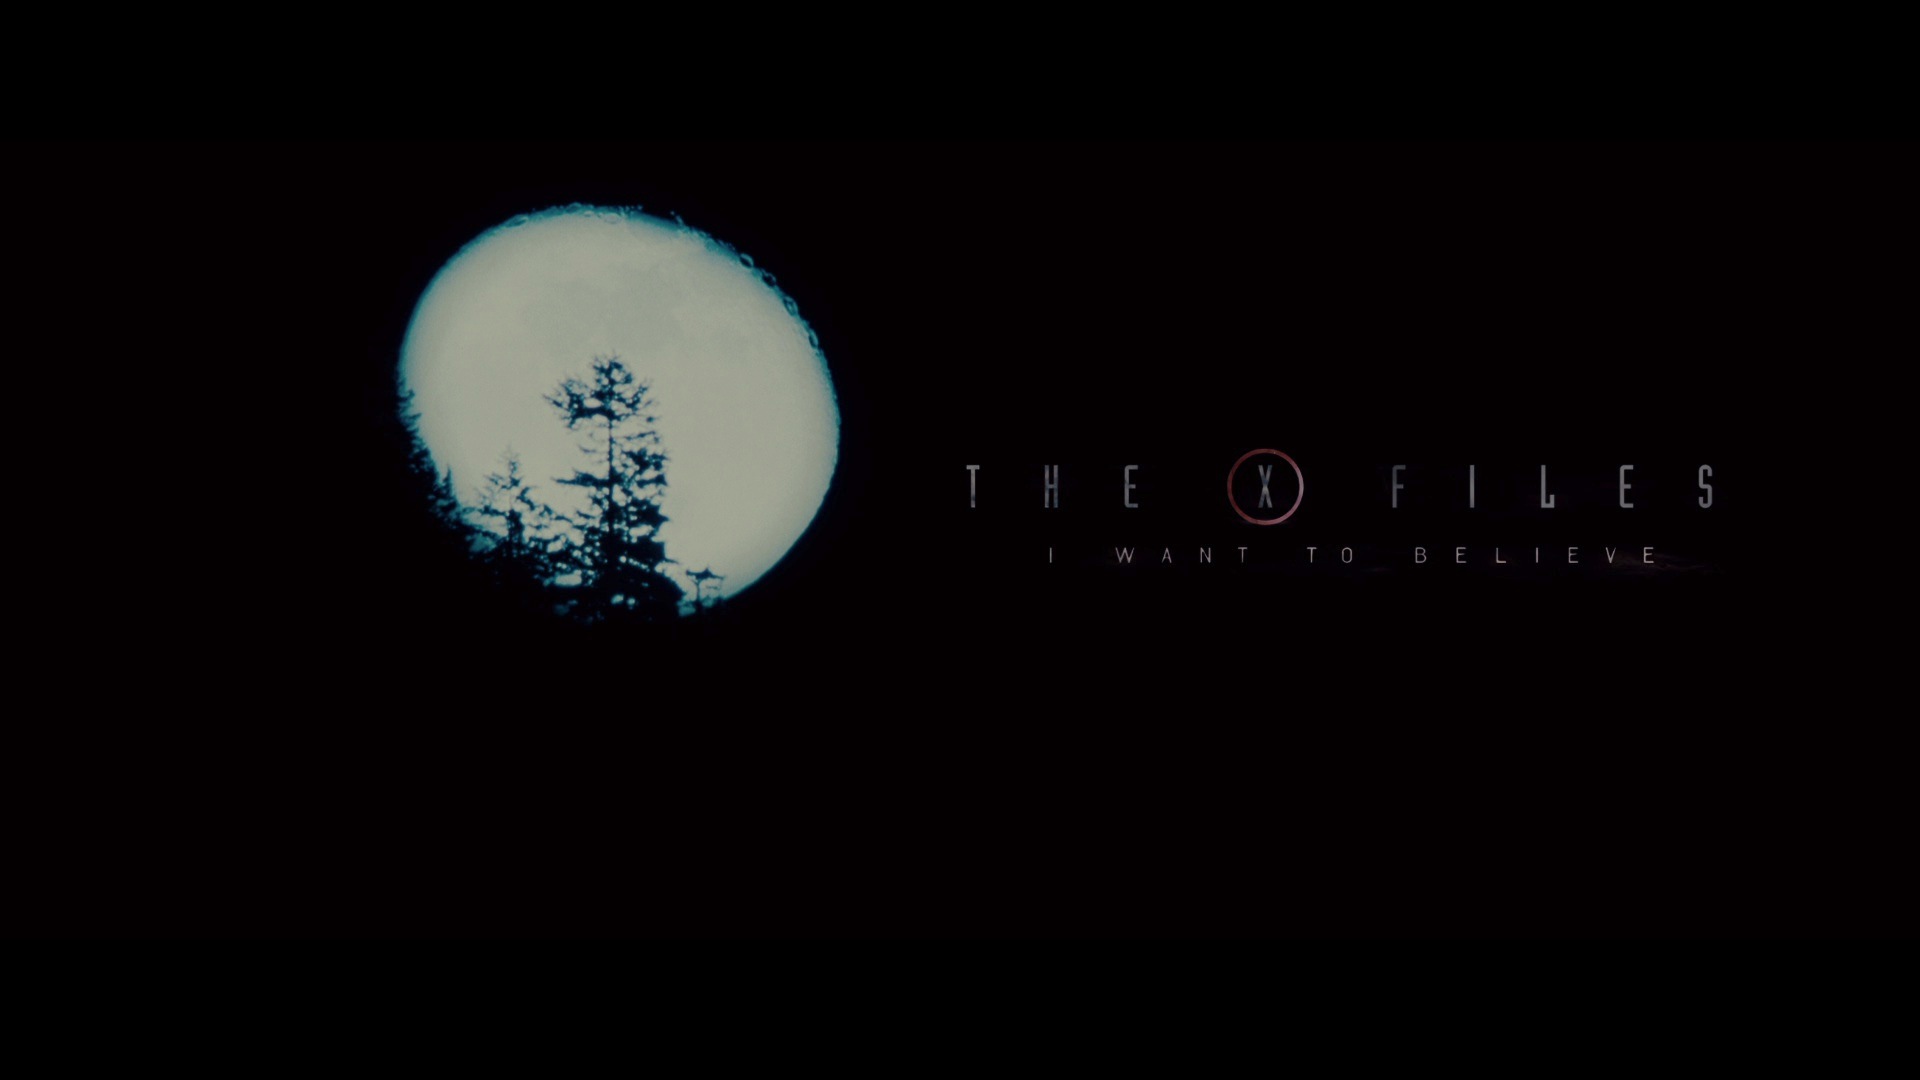 Check Out The X Files HD Wallpaper And High Definition